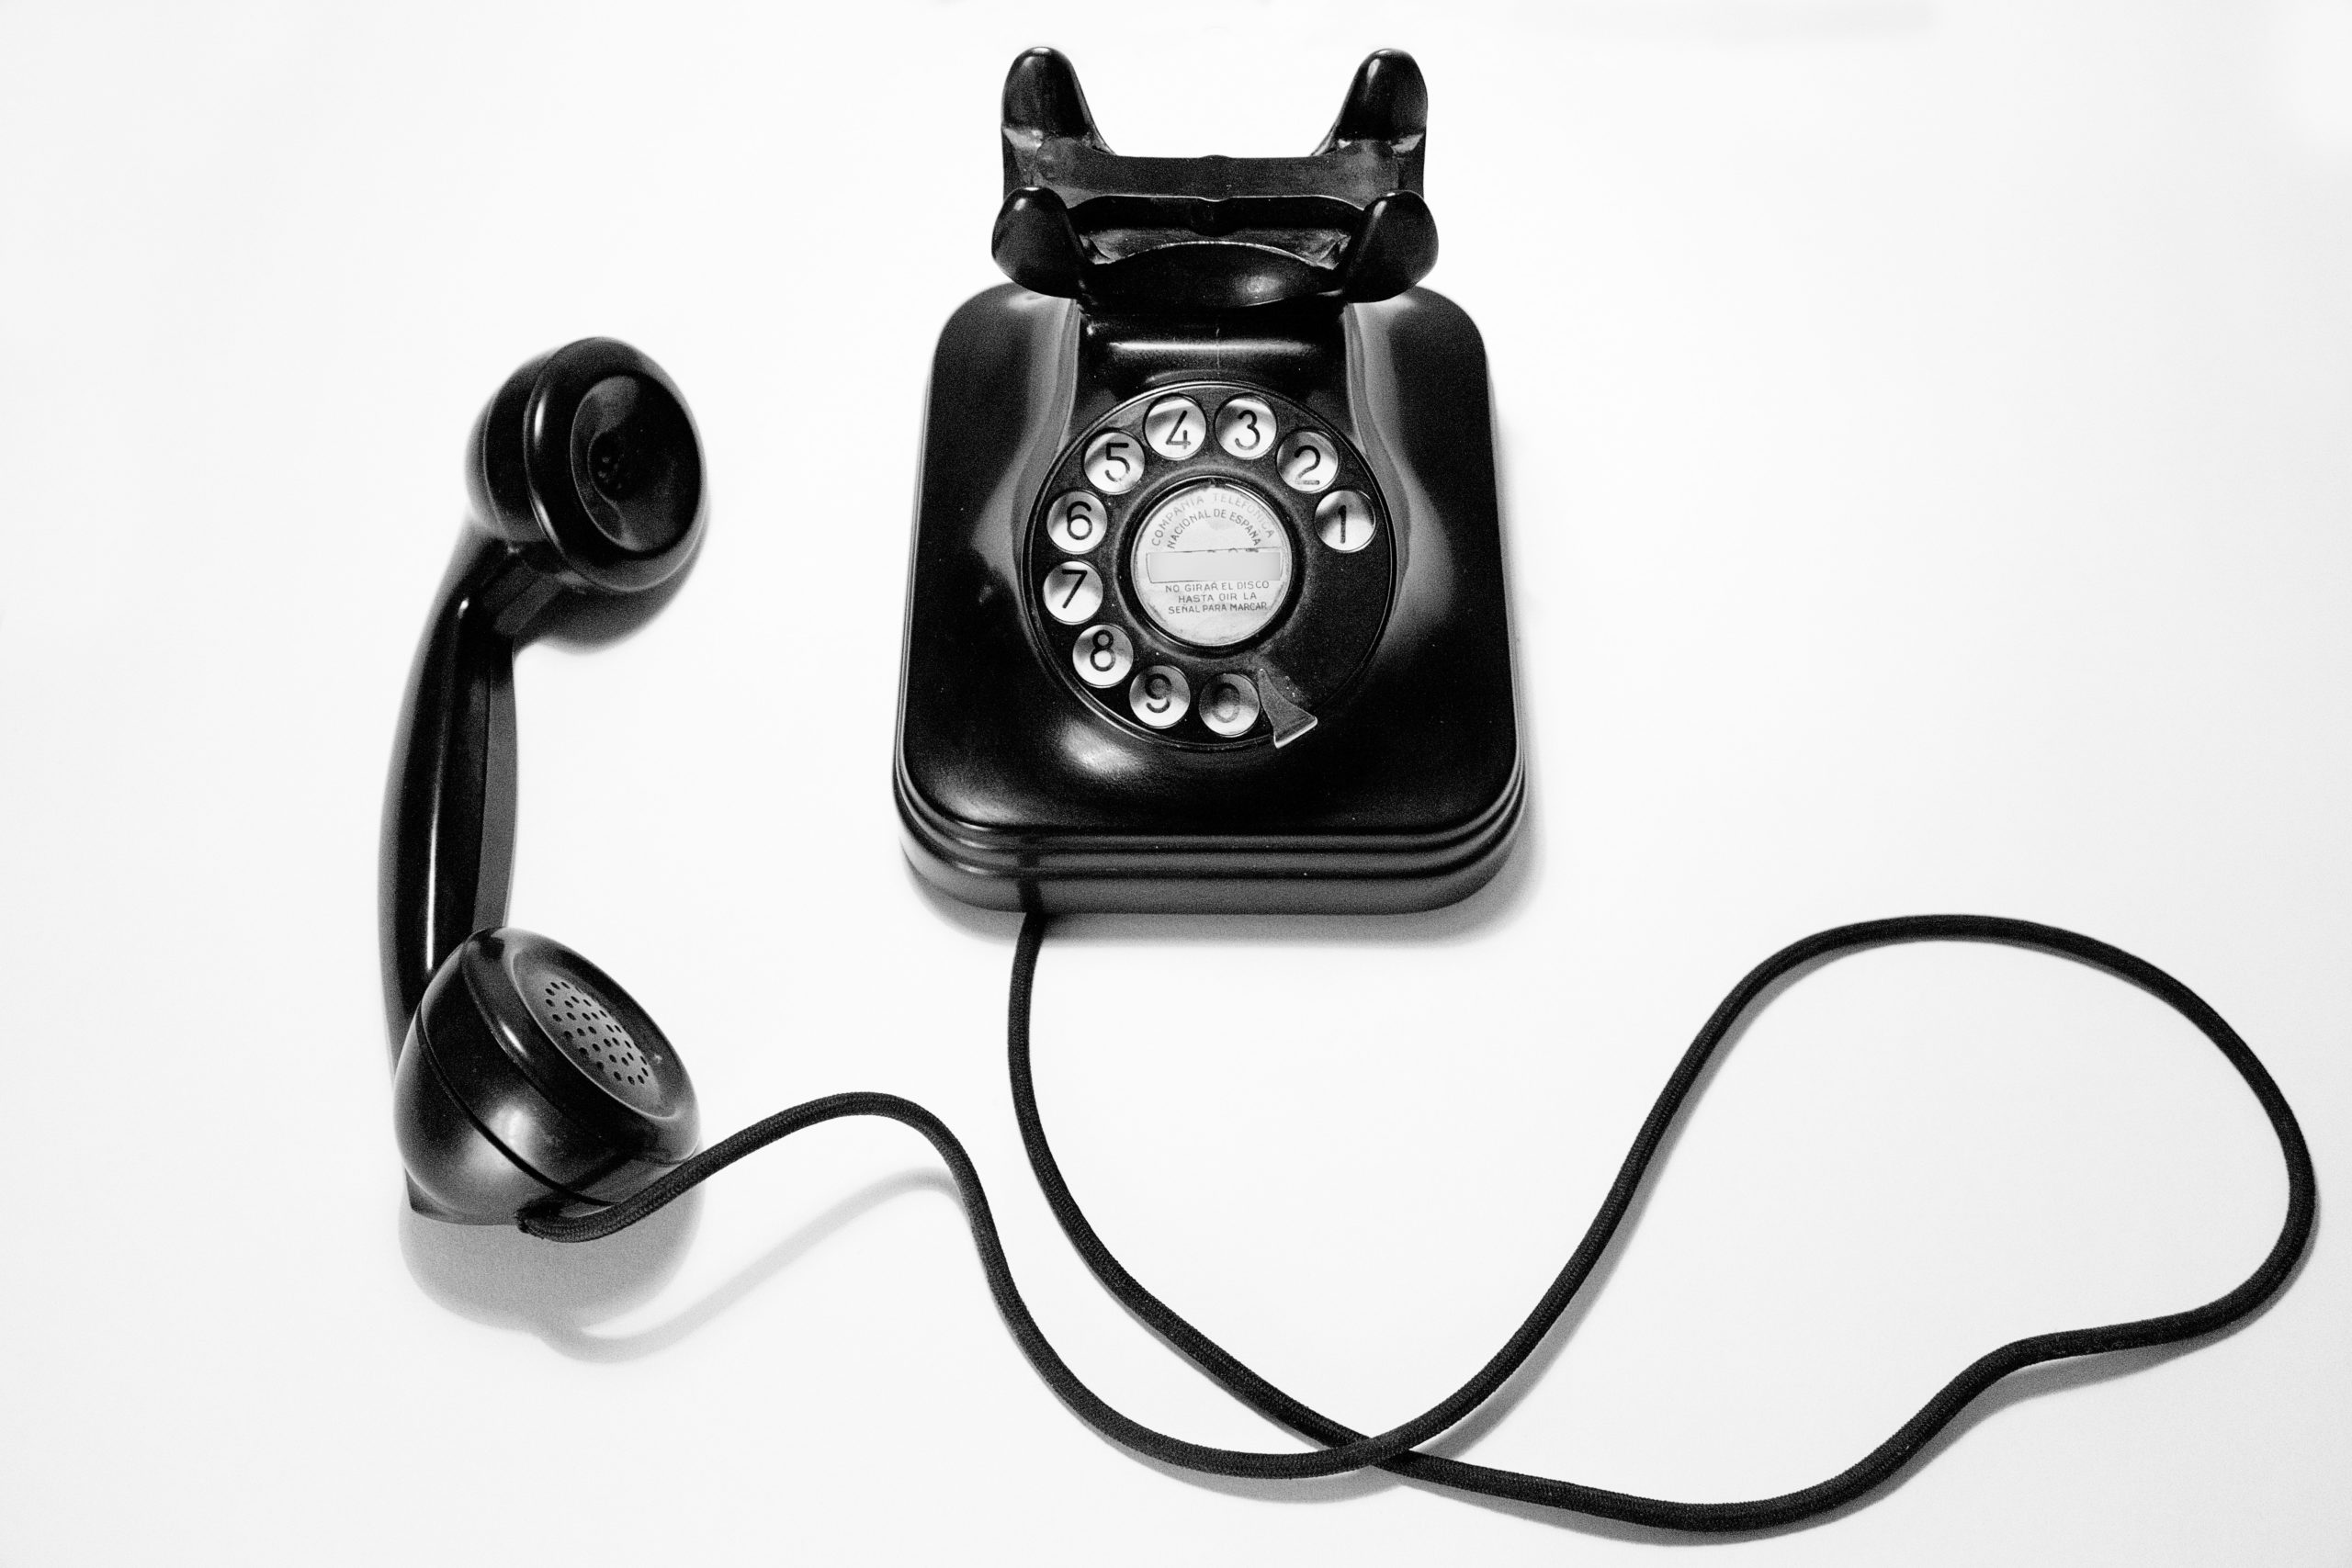 Image of a black rotary phone with the receiver off on a white background.